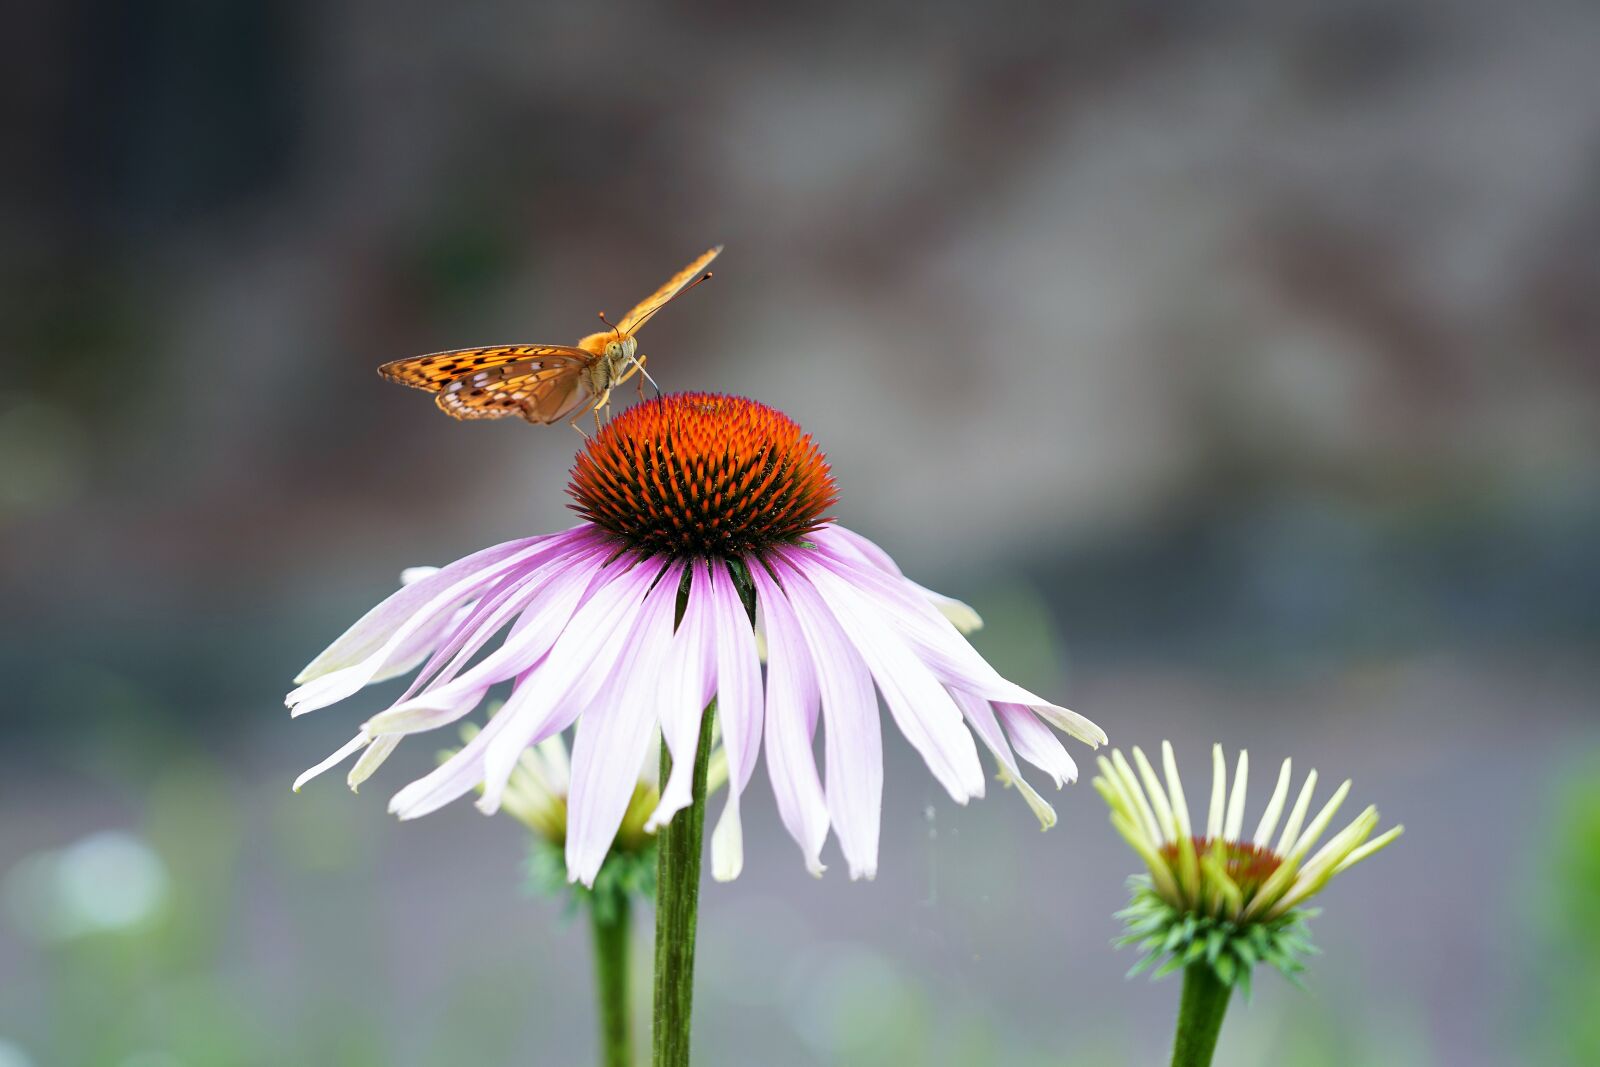 Sony a7R III sample photo. Butterfly, flower, insect photography